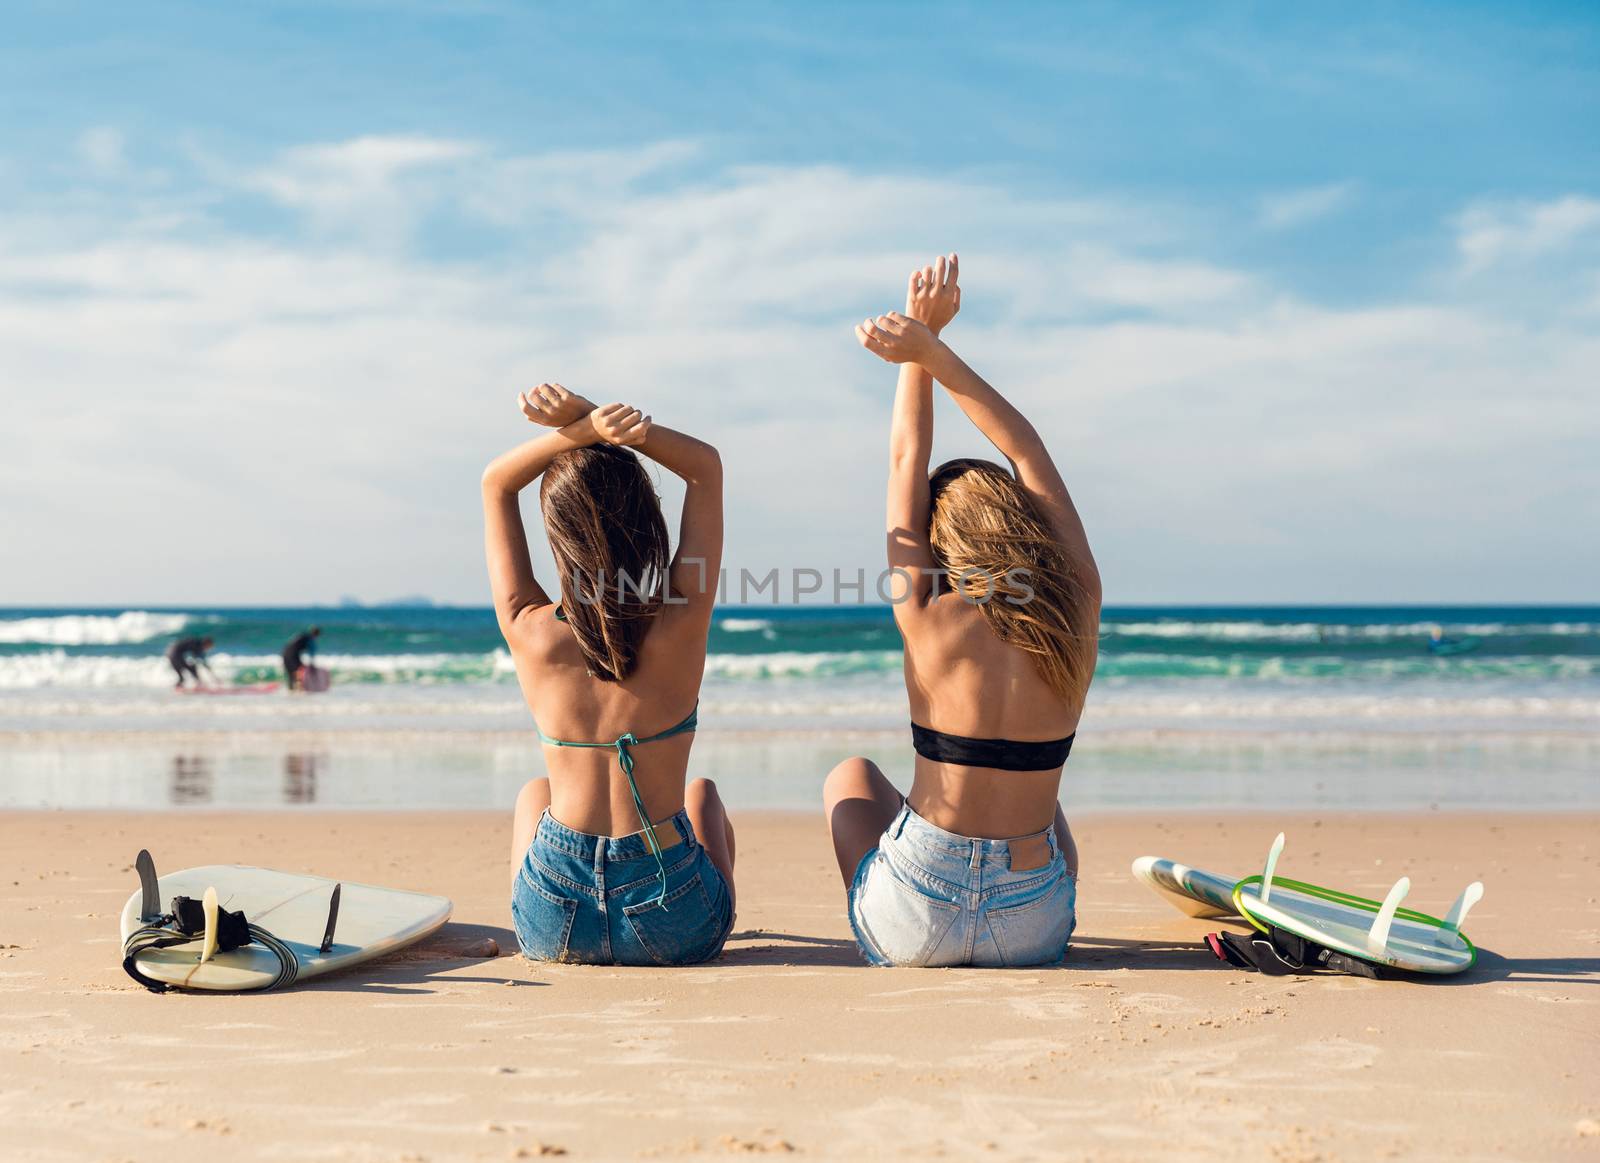 Two beautiful surfer girls at the beach with arms open